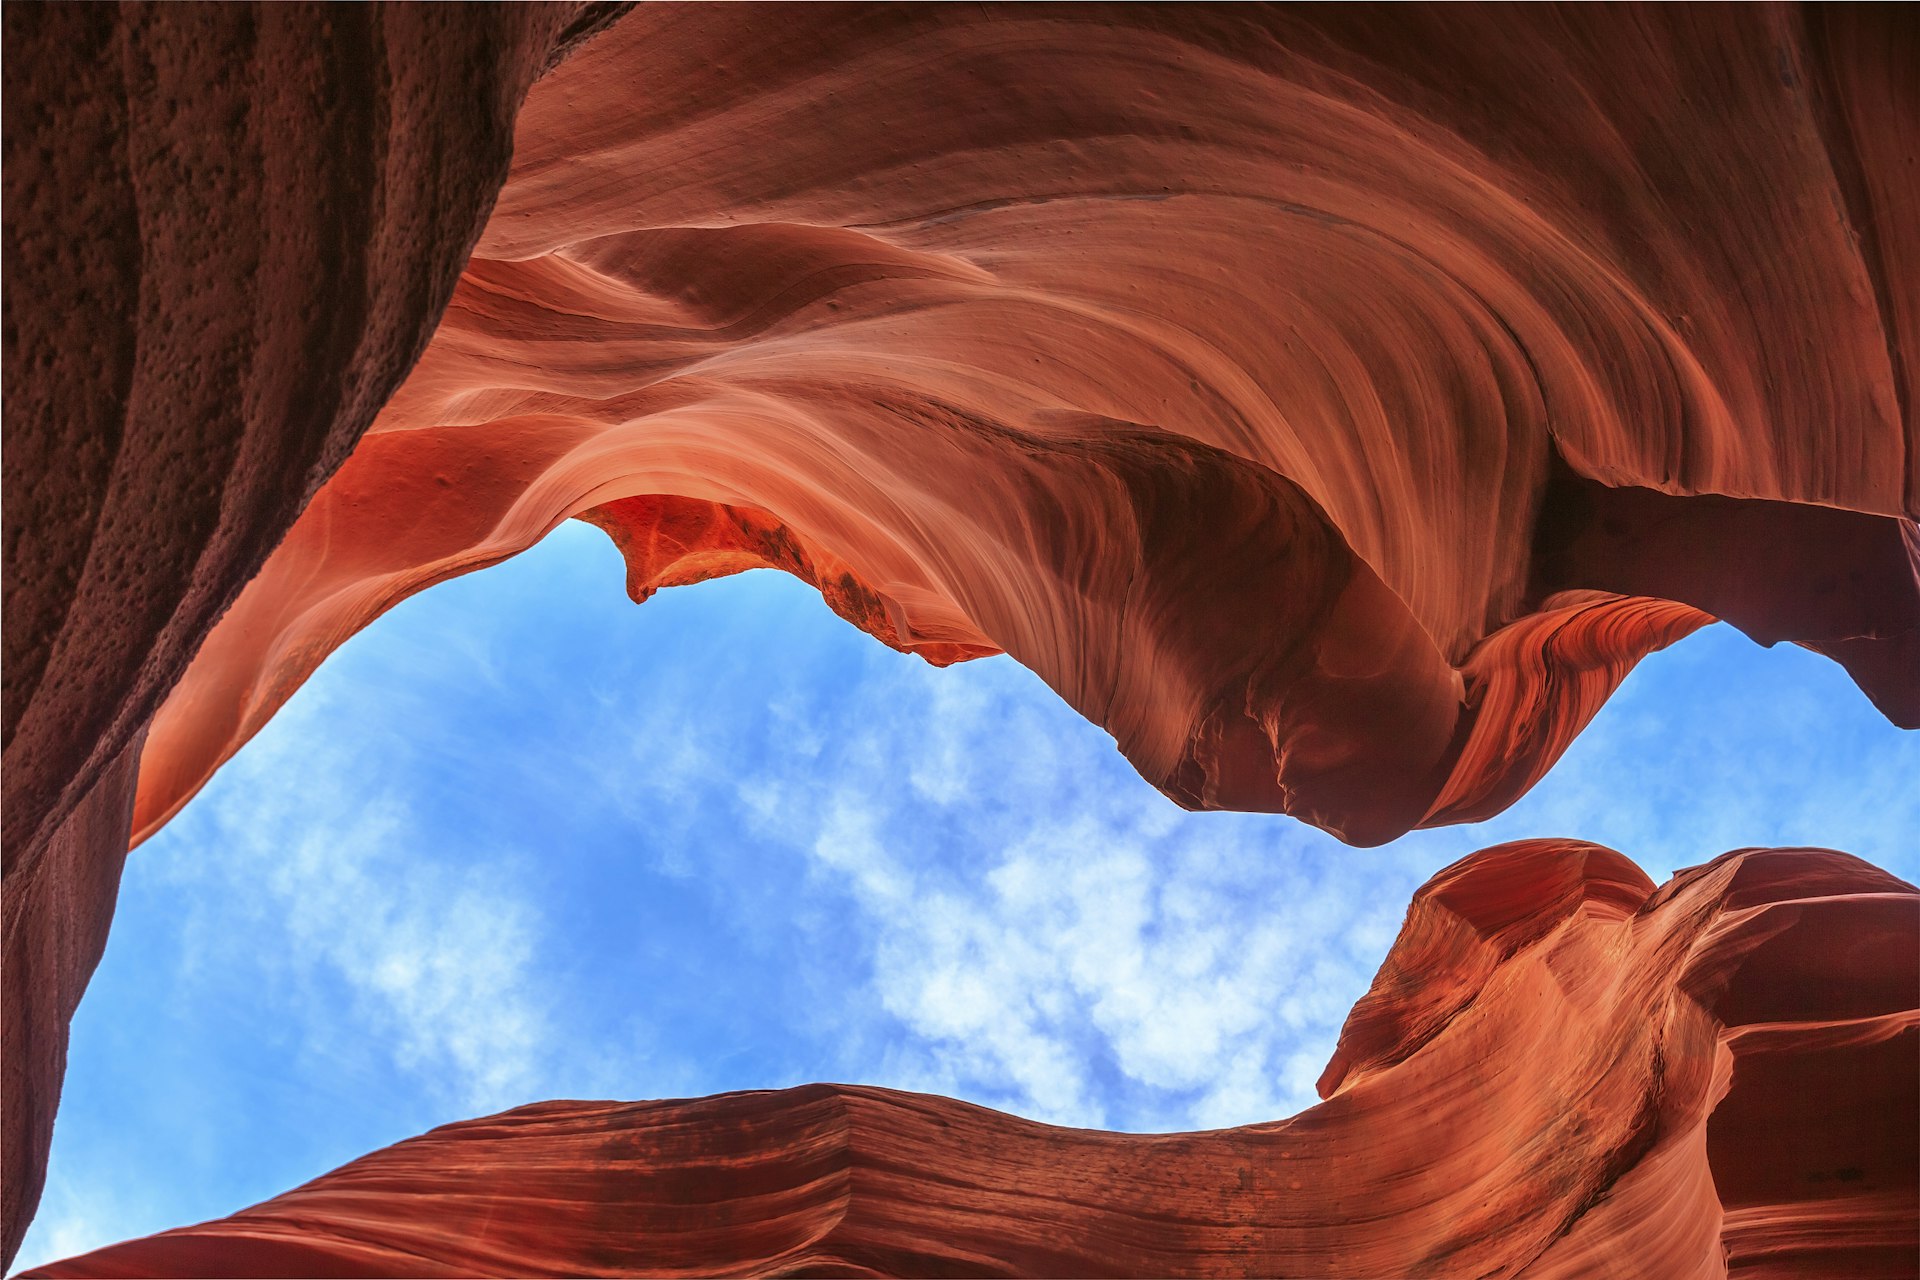 Vibrant red rocks sweep and whirl overhead below a bright blue sky